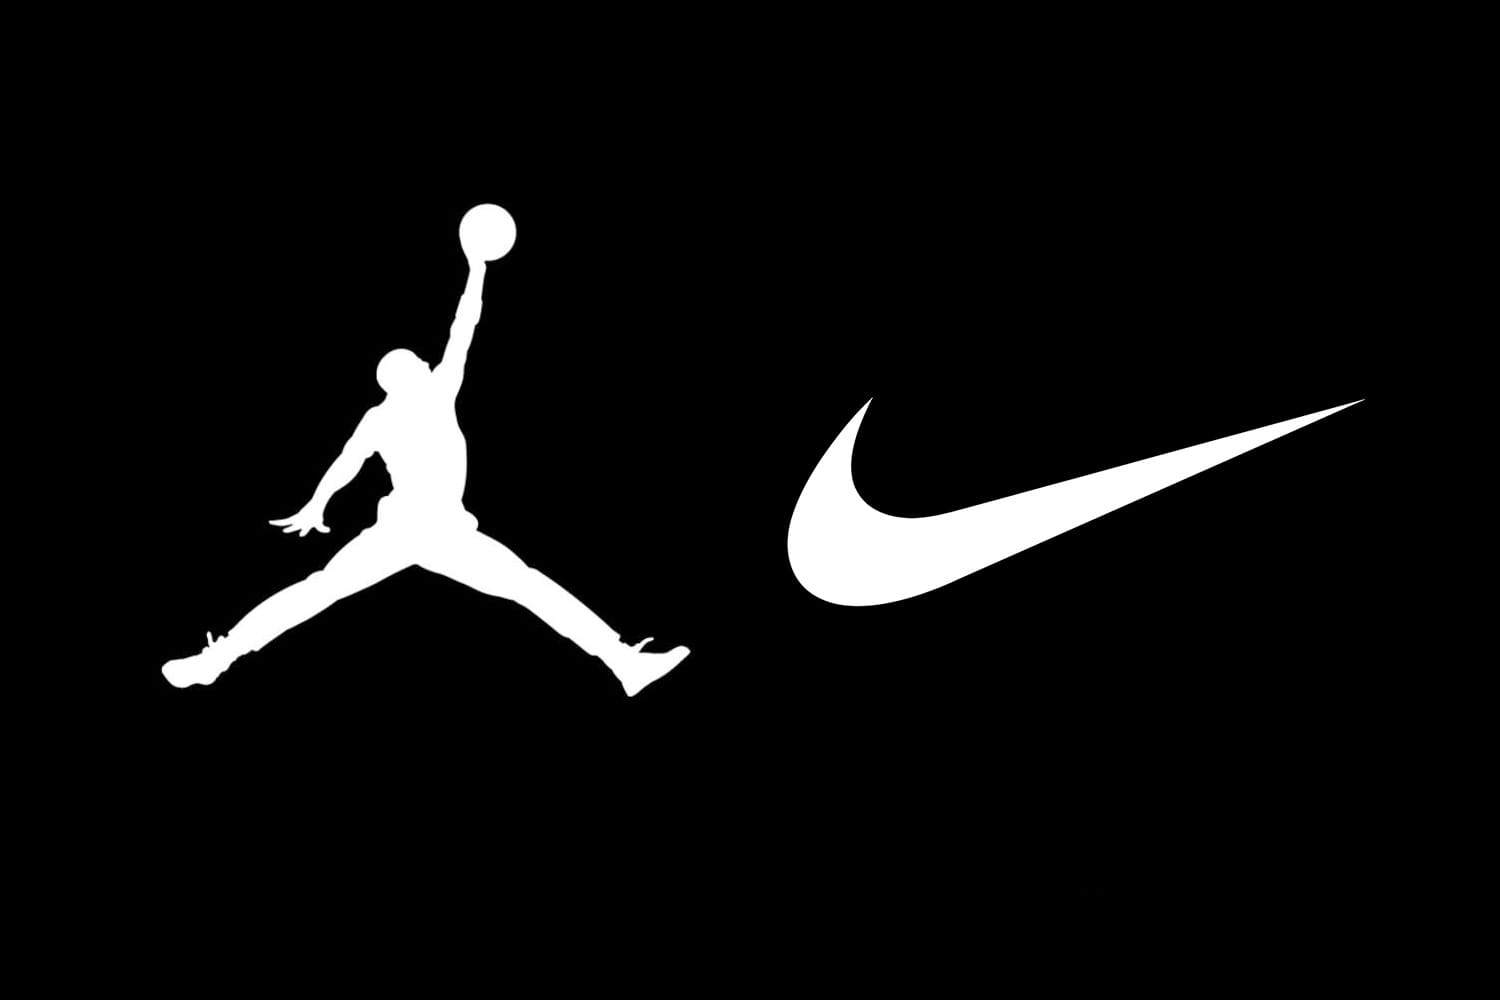 Nike Wants to Add the Swoosh and Jumpman Logos to NBA Apparel | HYPEBEAST